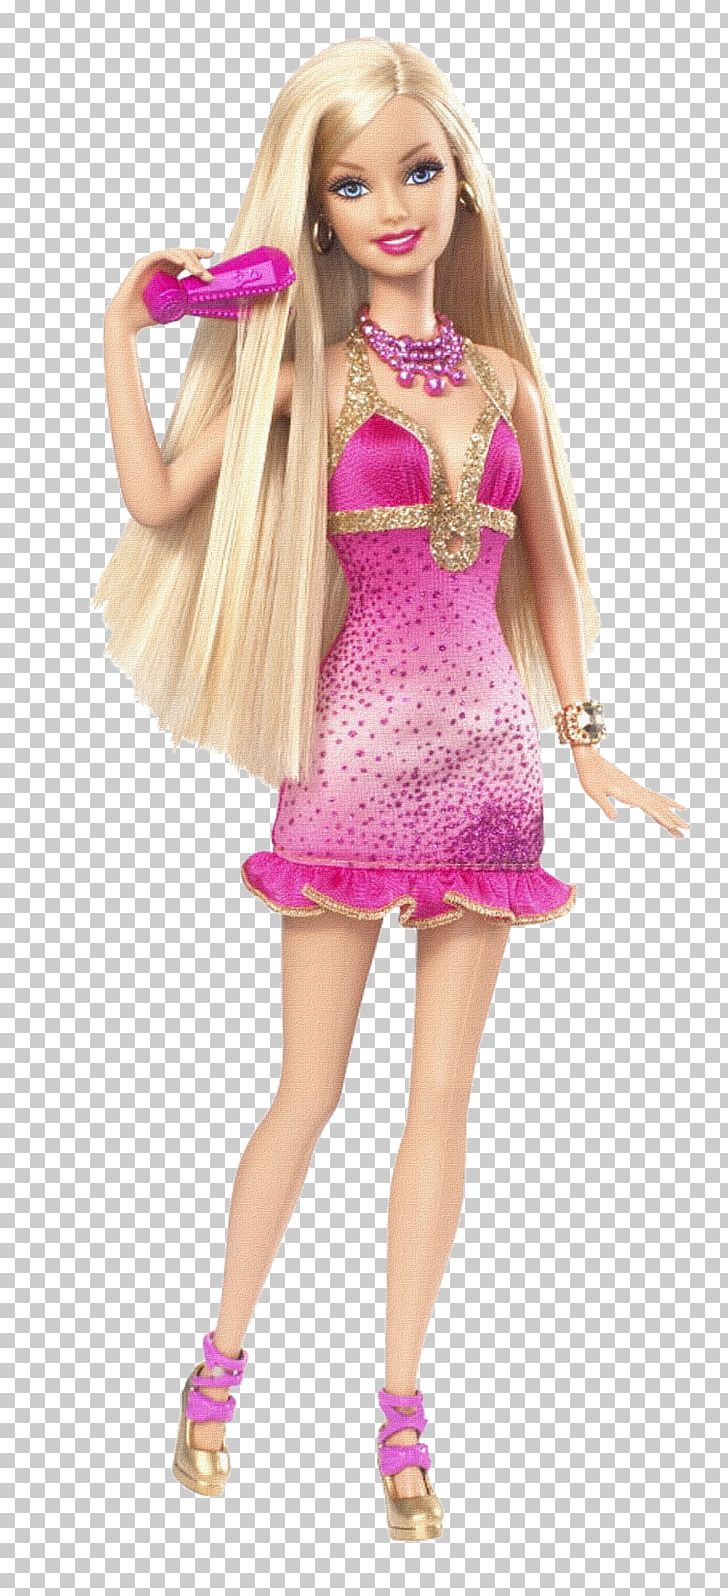 Doll Barbie Hair Toy Clothing Accessories PNG, Clipart, Accessories, Art, Barbie, Clothing, Clothing Accessories Free PNG Download